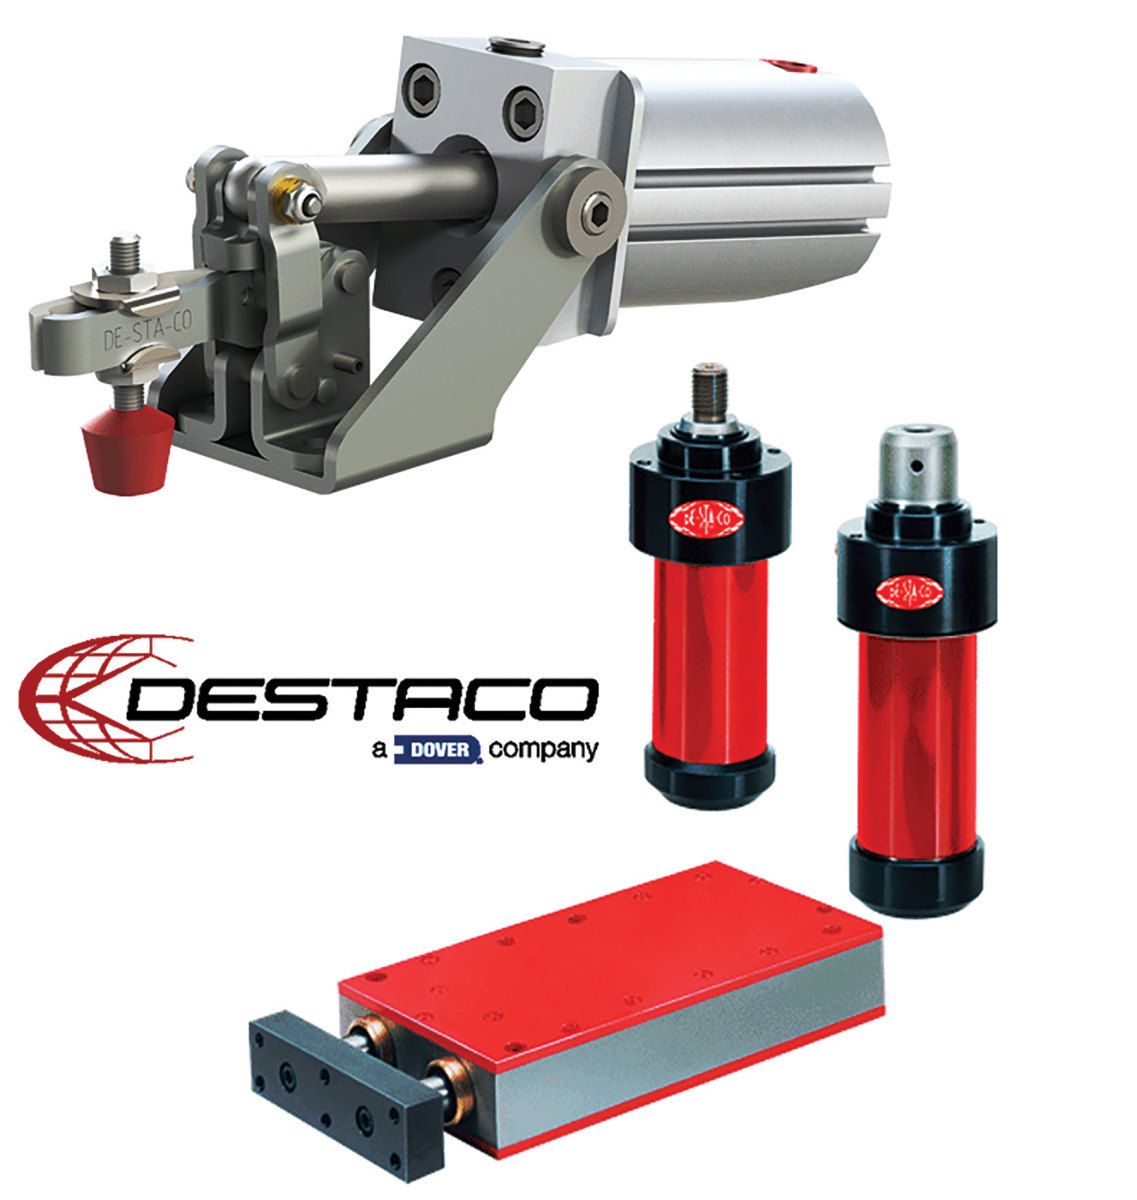 Destaco’s toggle clamps with air-actuated cylinders.